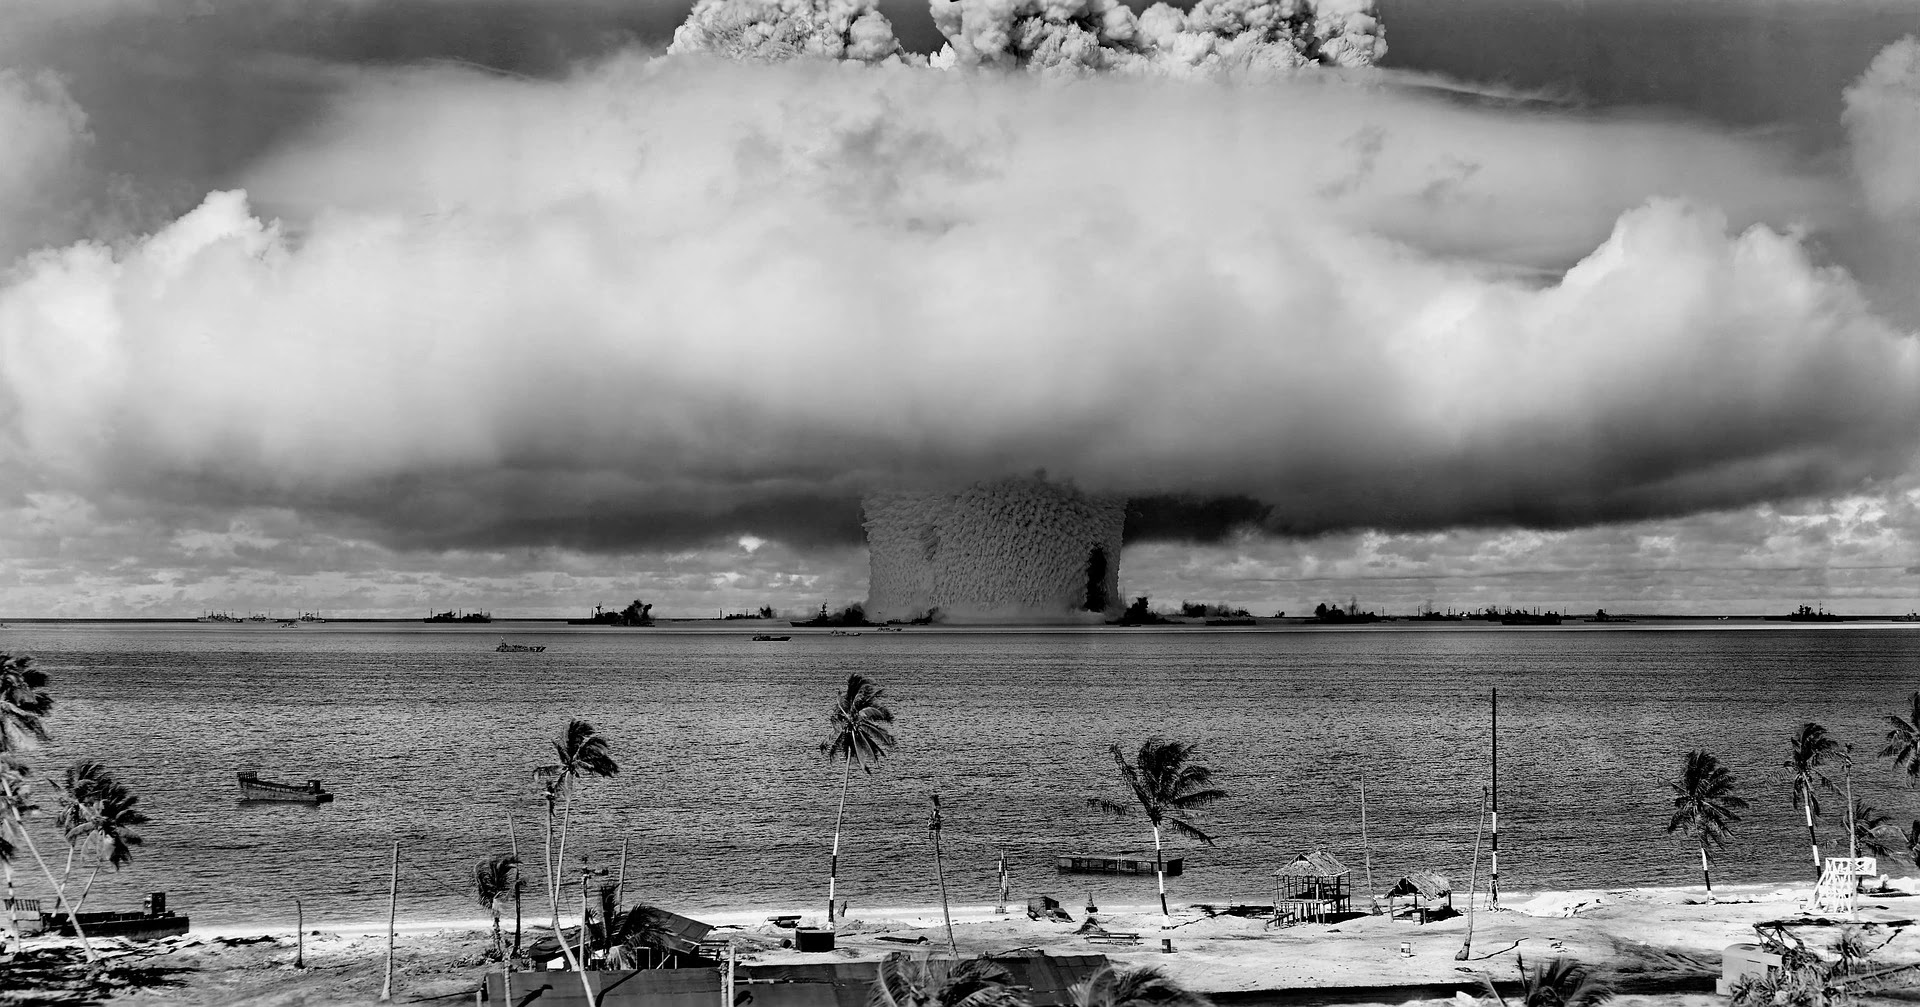 Why Do Nuclear Bombs Form Mushroom Clouds?